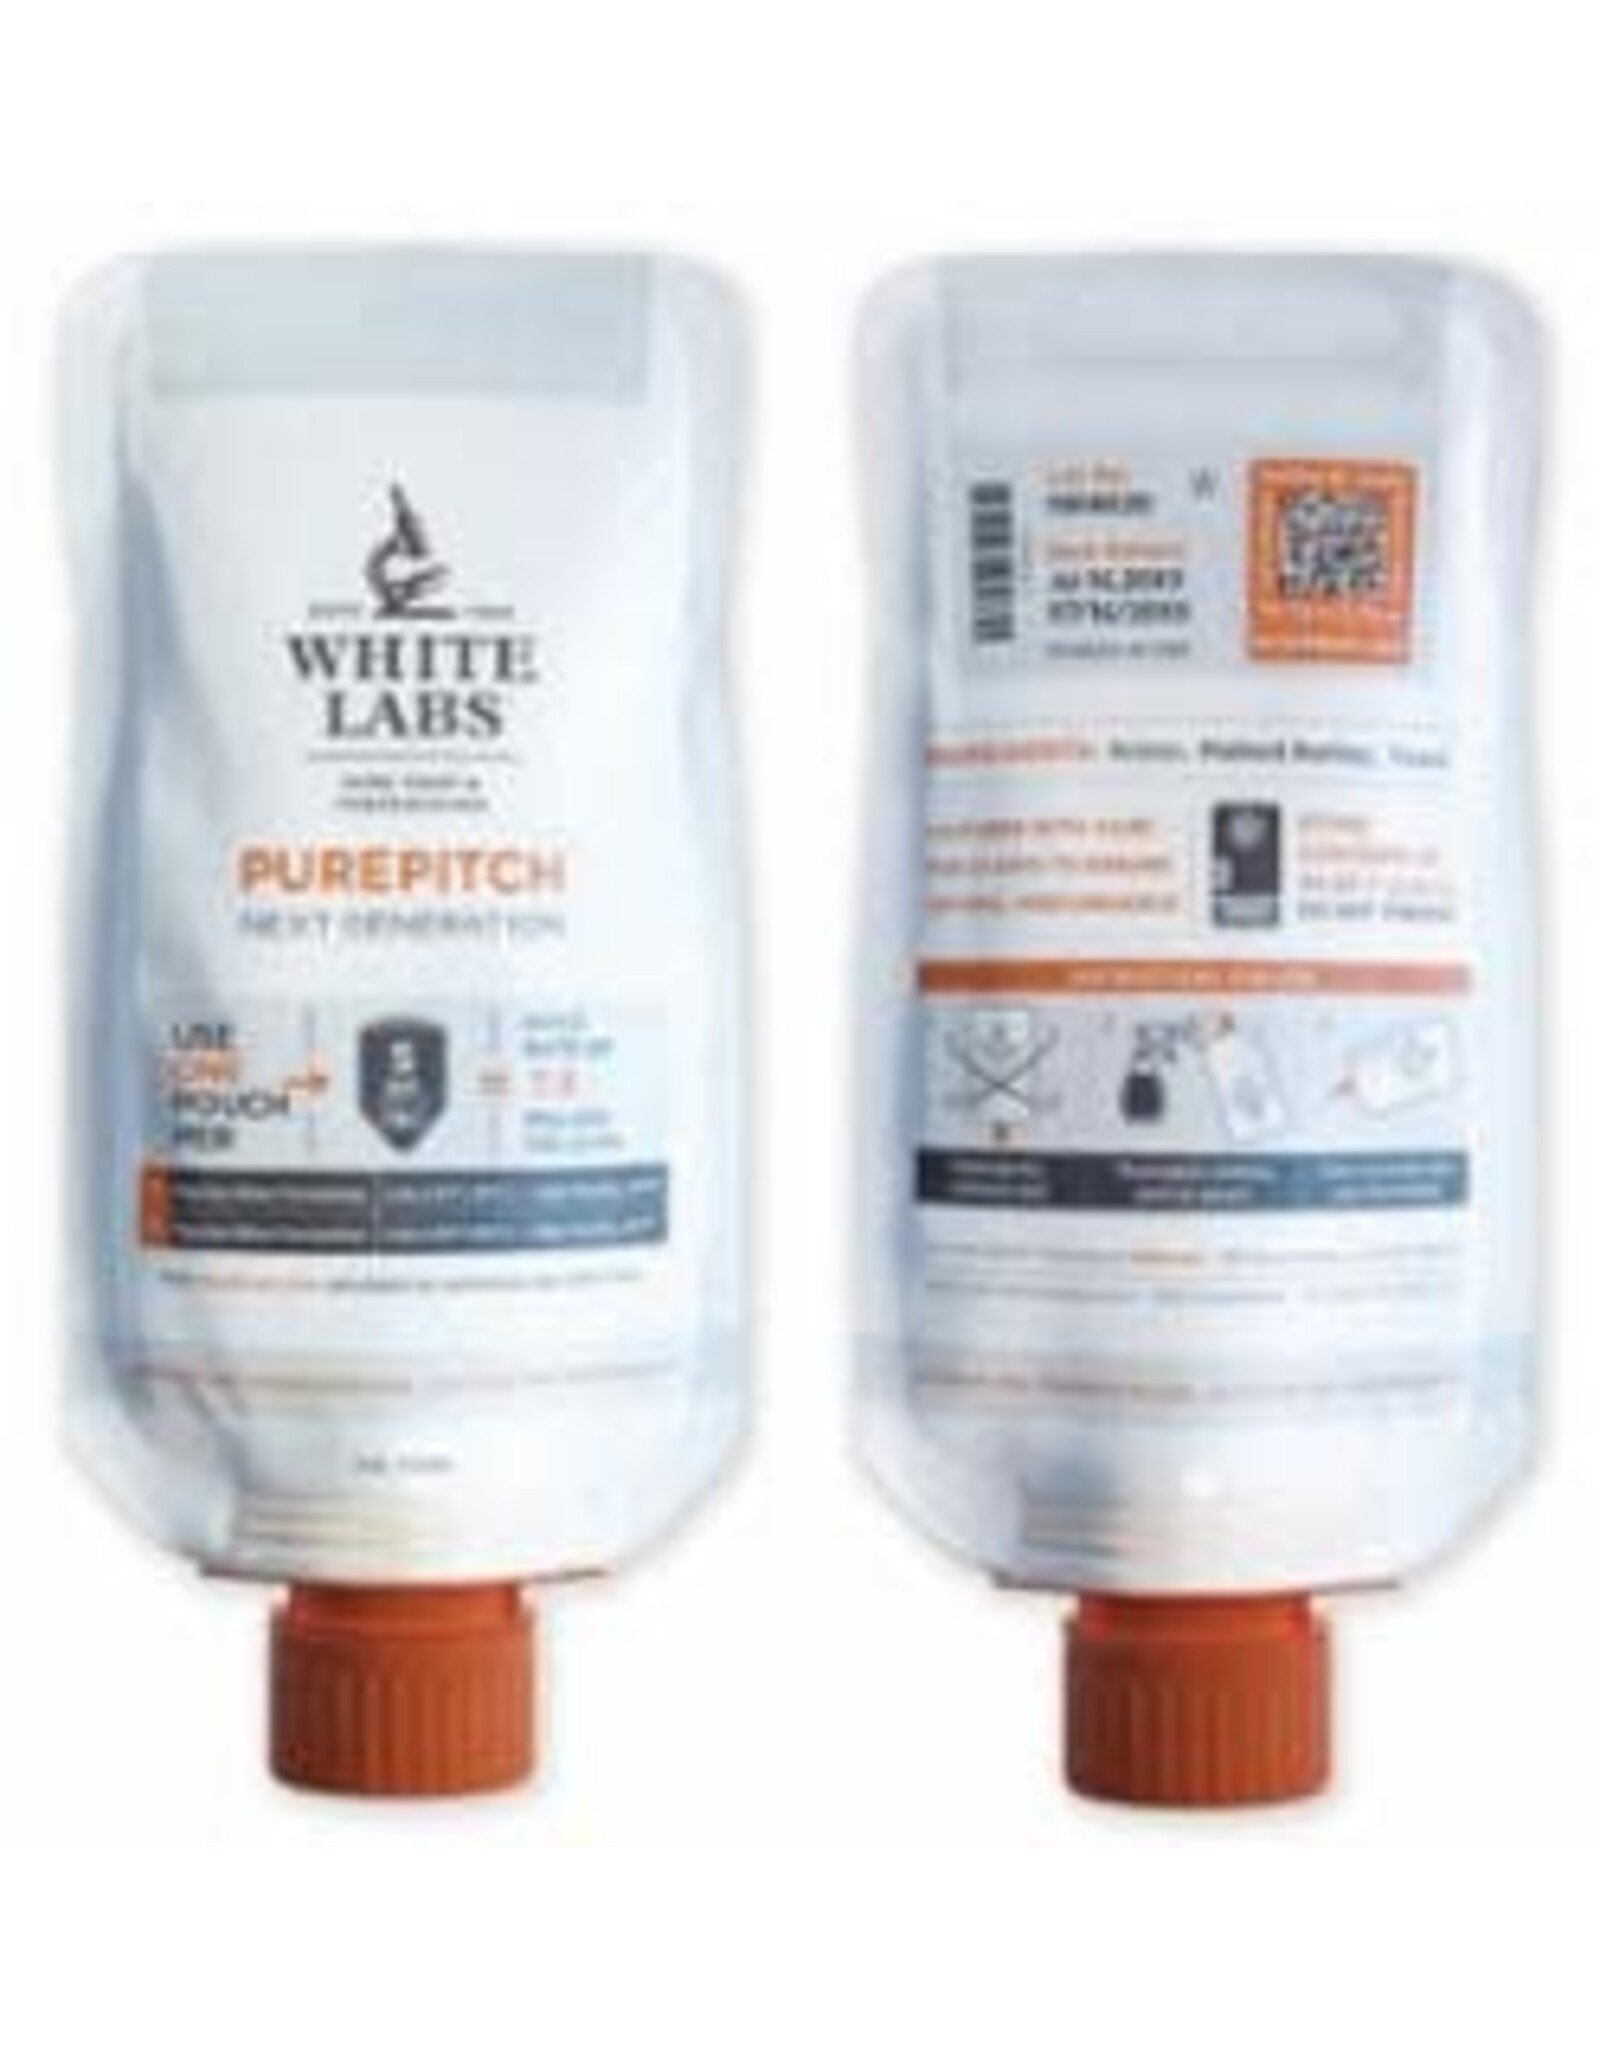 White labs WLP 001 PurePItch® Next Generation California Ale Yeast